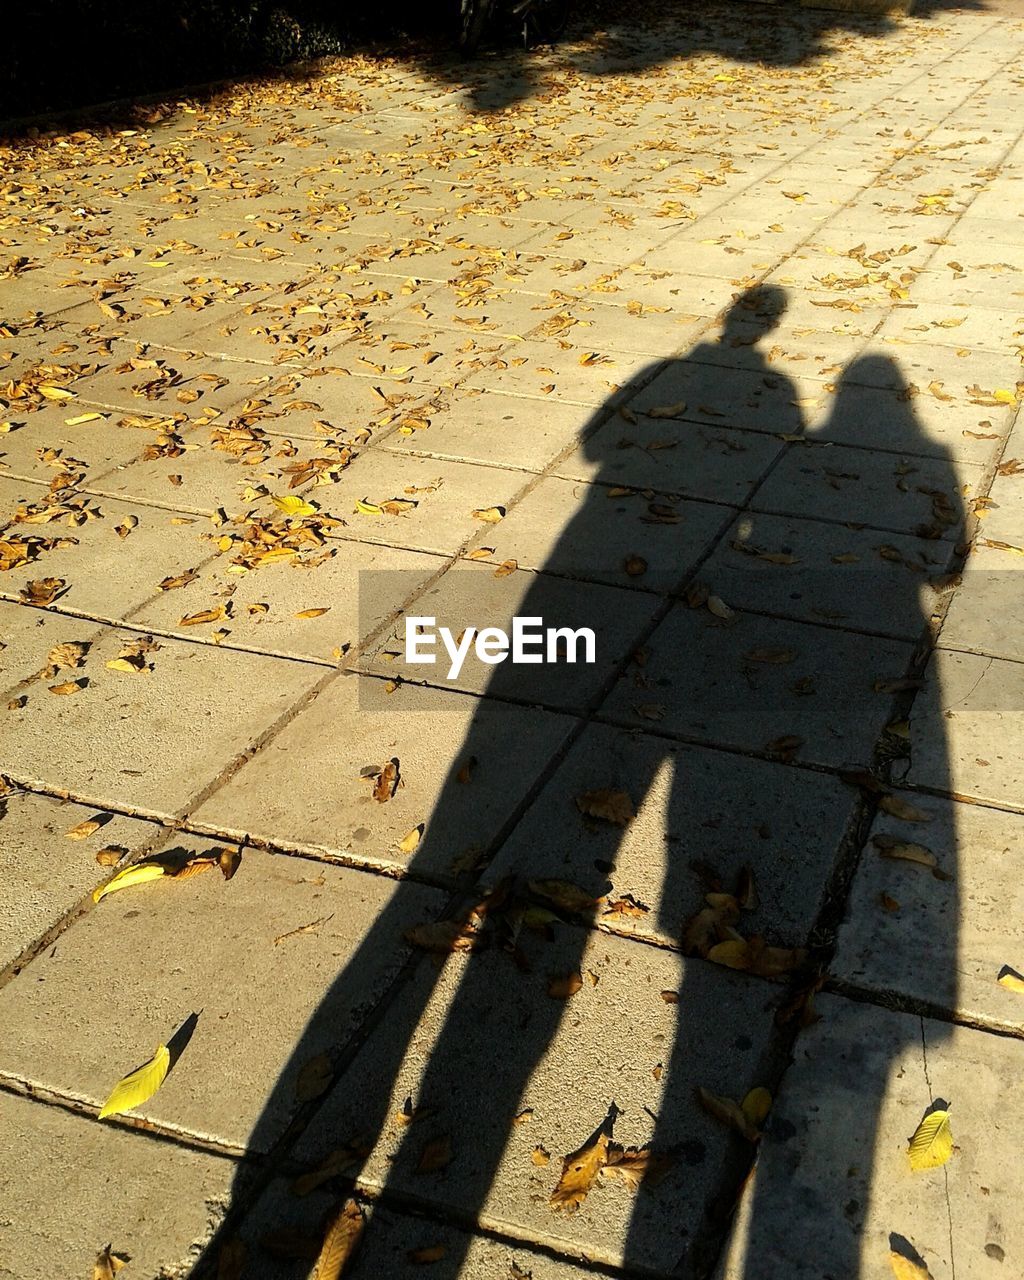 Shadow of man and woman while standing on paving stone